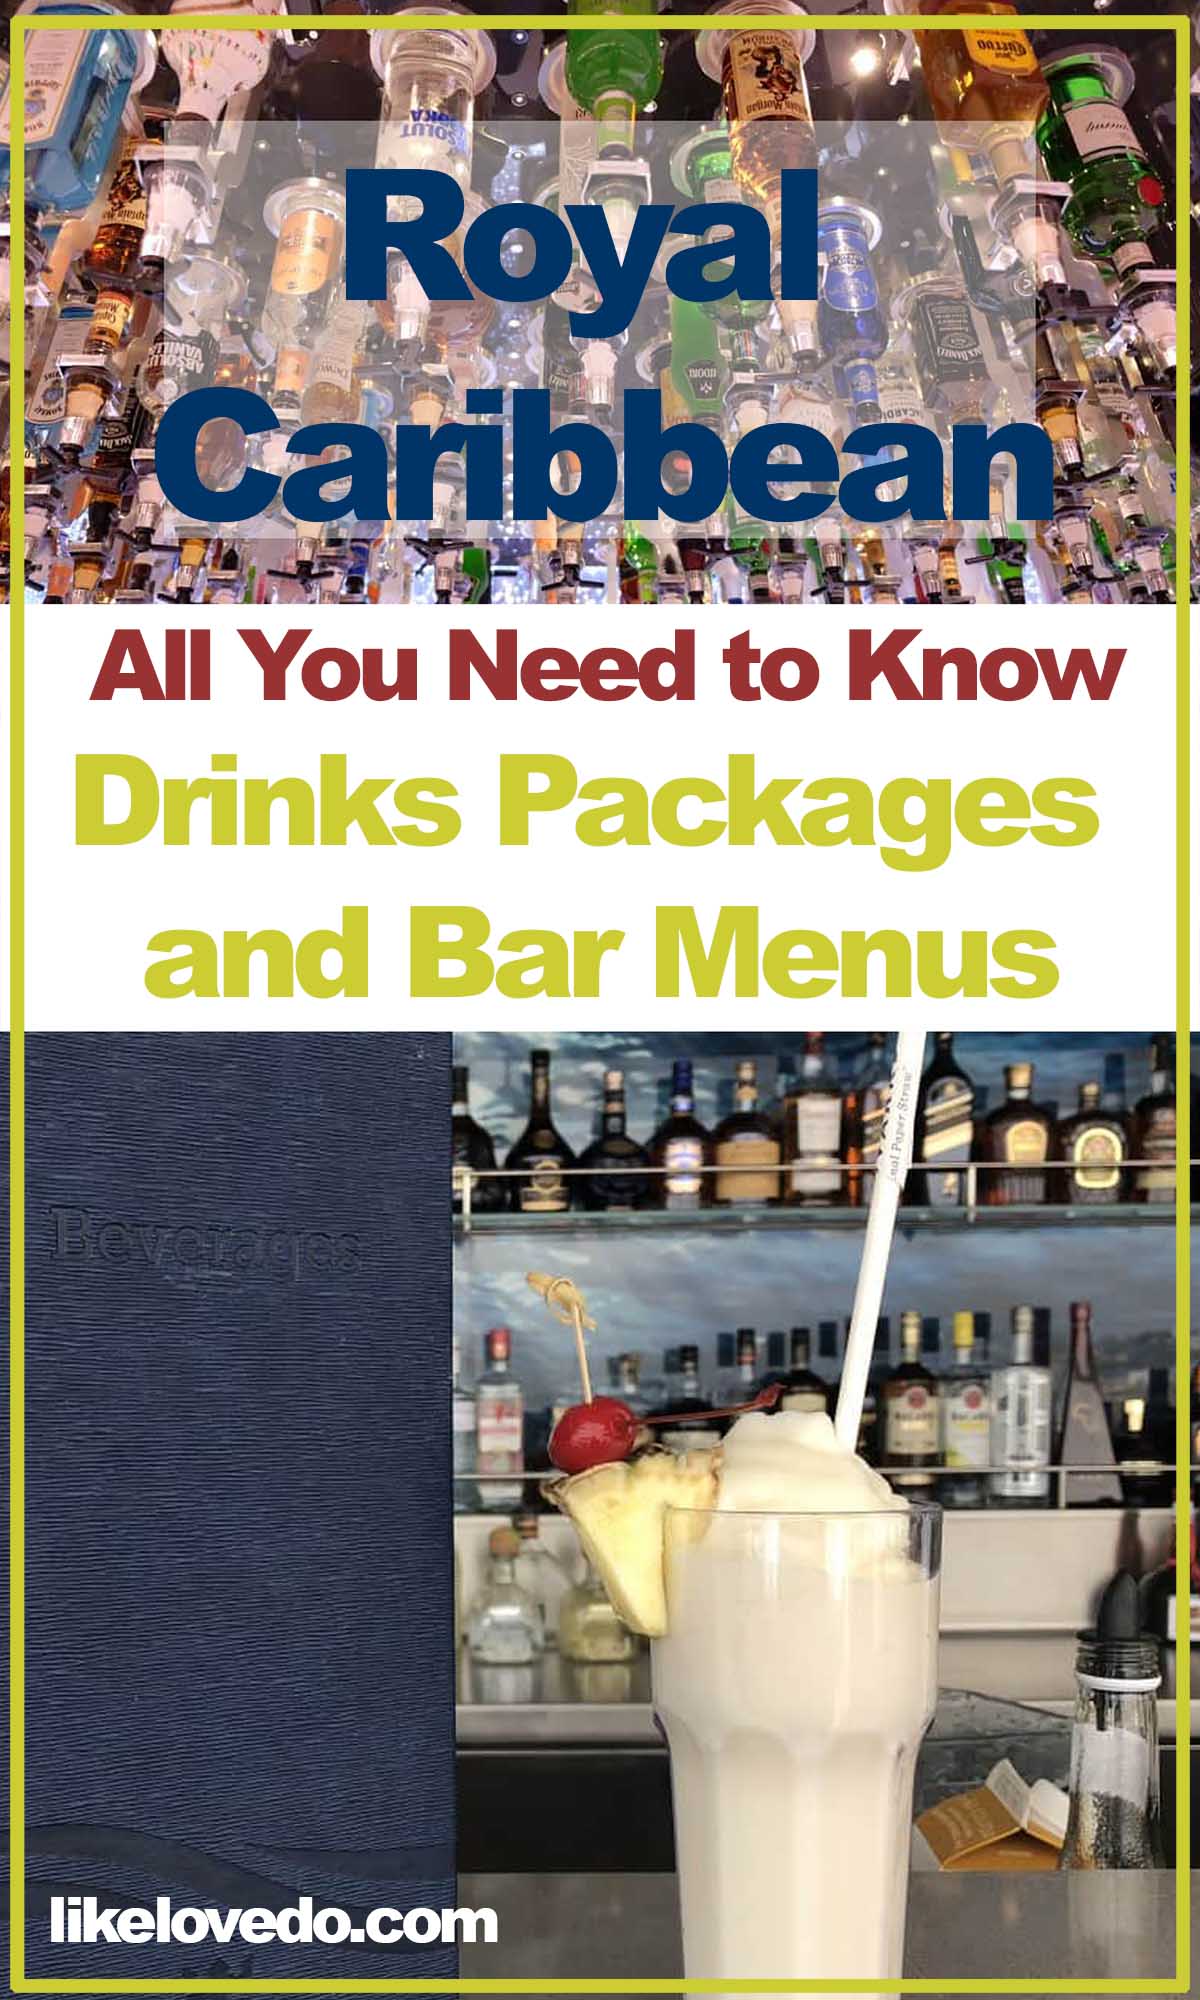  Royal Caribbean all you need to know about drink packages and bar menus.